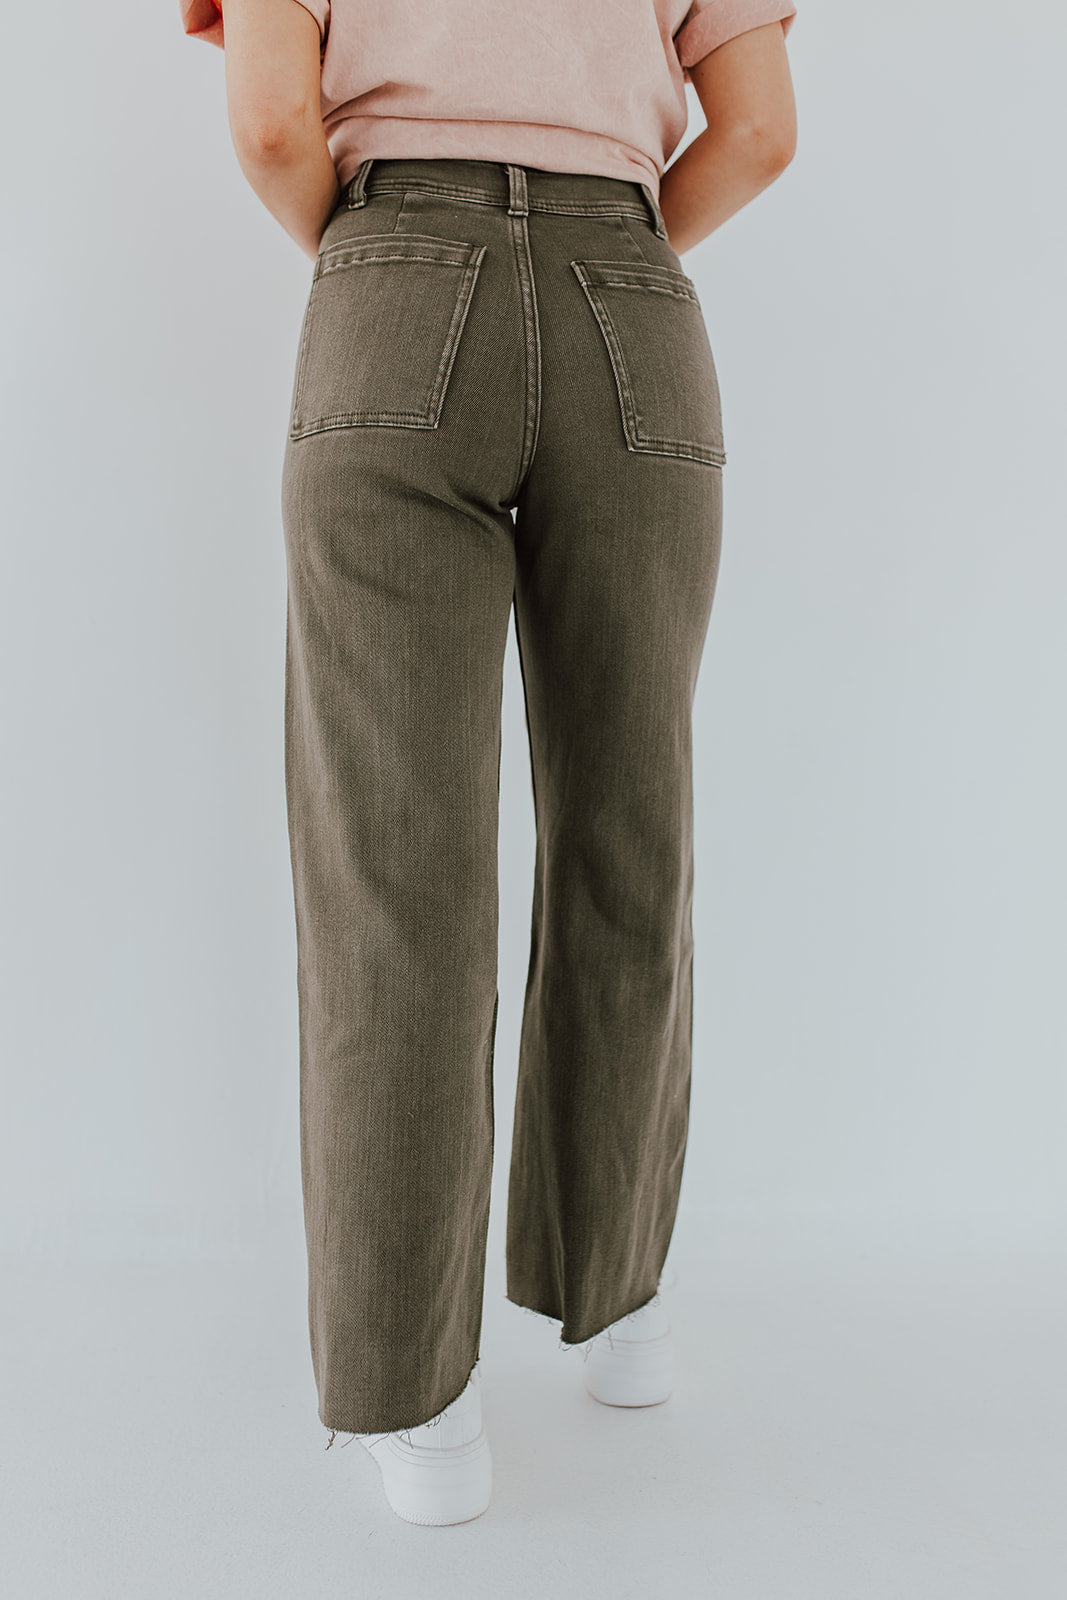 THE HYDE WIDE LEG PANTS IN OLIVE